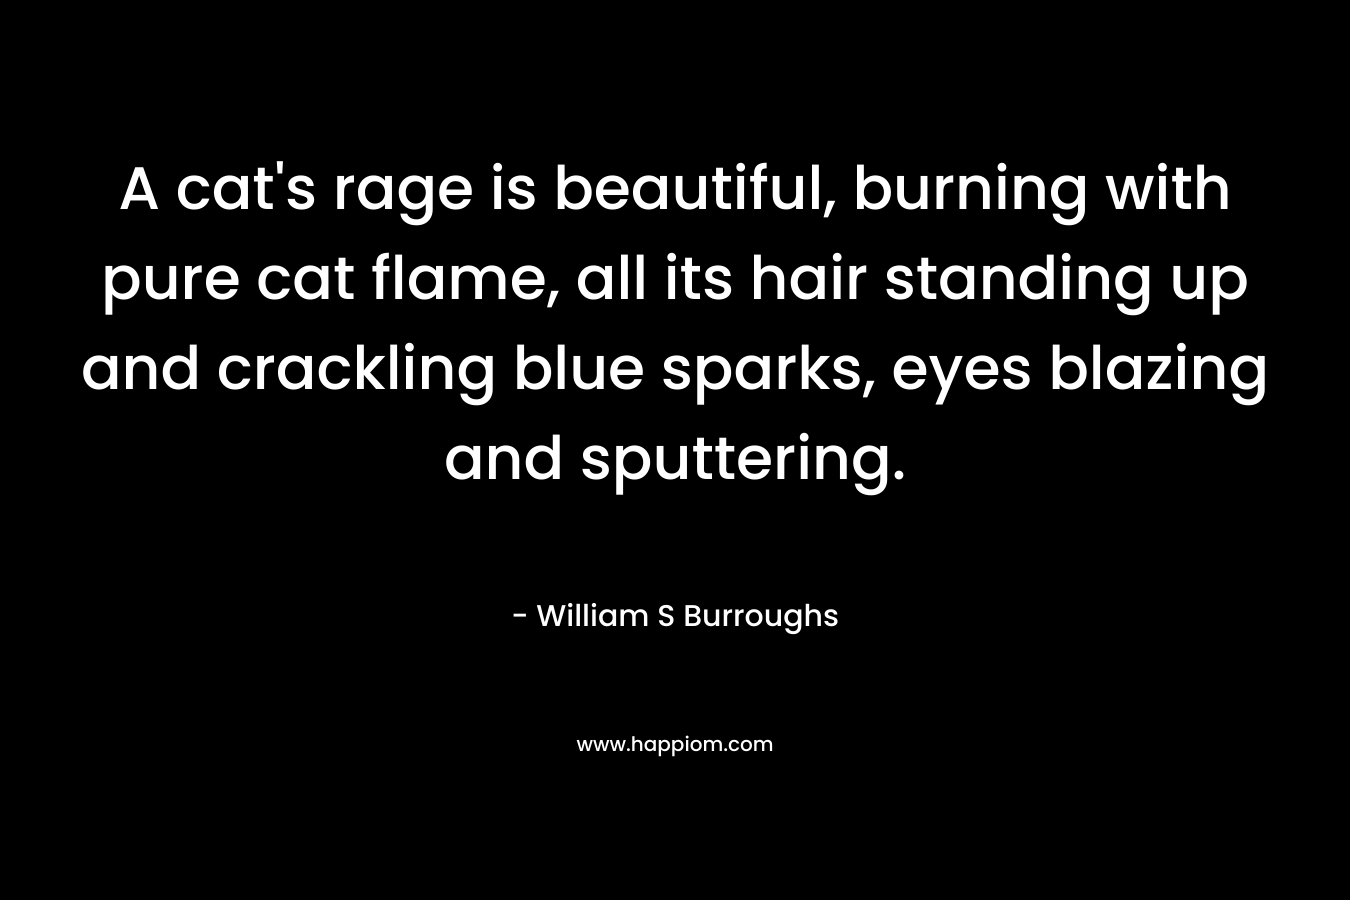 A cat’s rage is beautiful, burning with pure cat flame, all its hair standing up and crackling blue sparks, eyes blazing and sputtering. – William S Burroughs